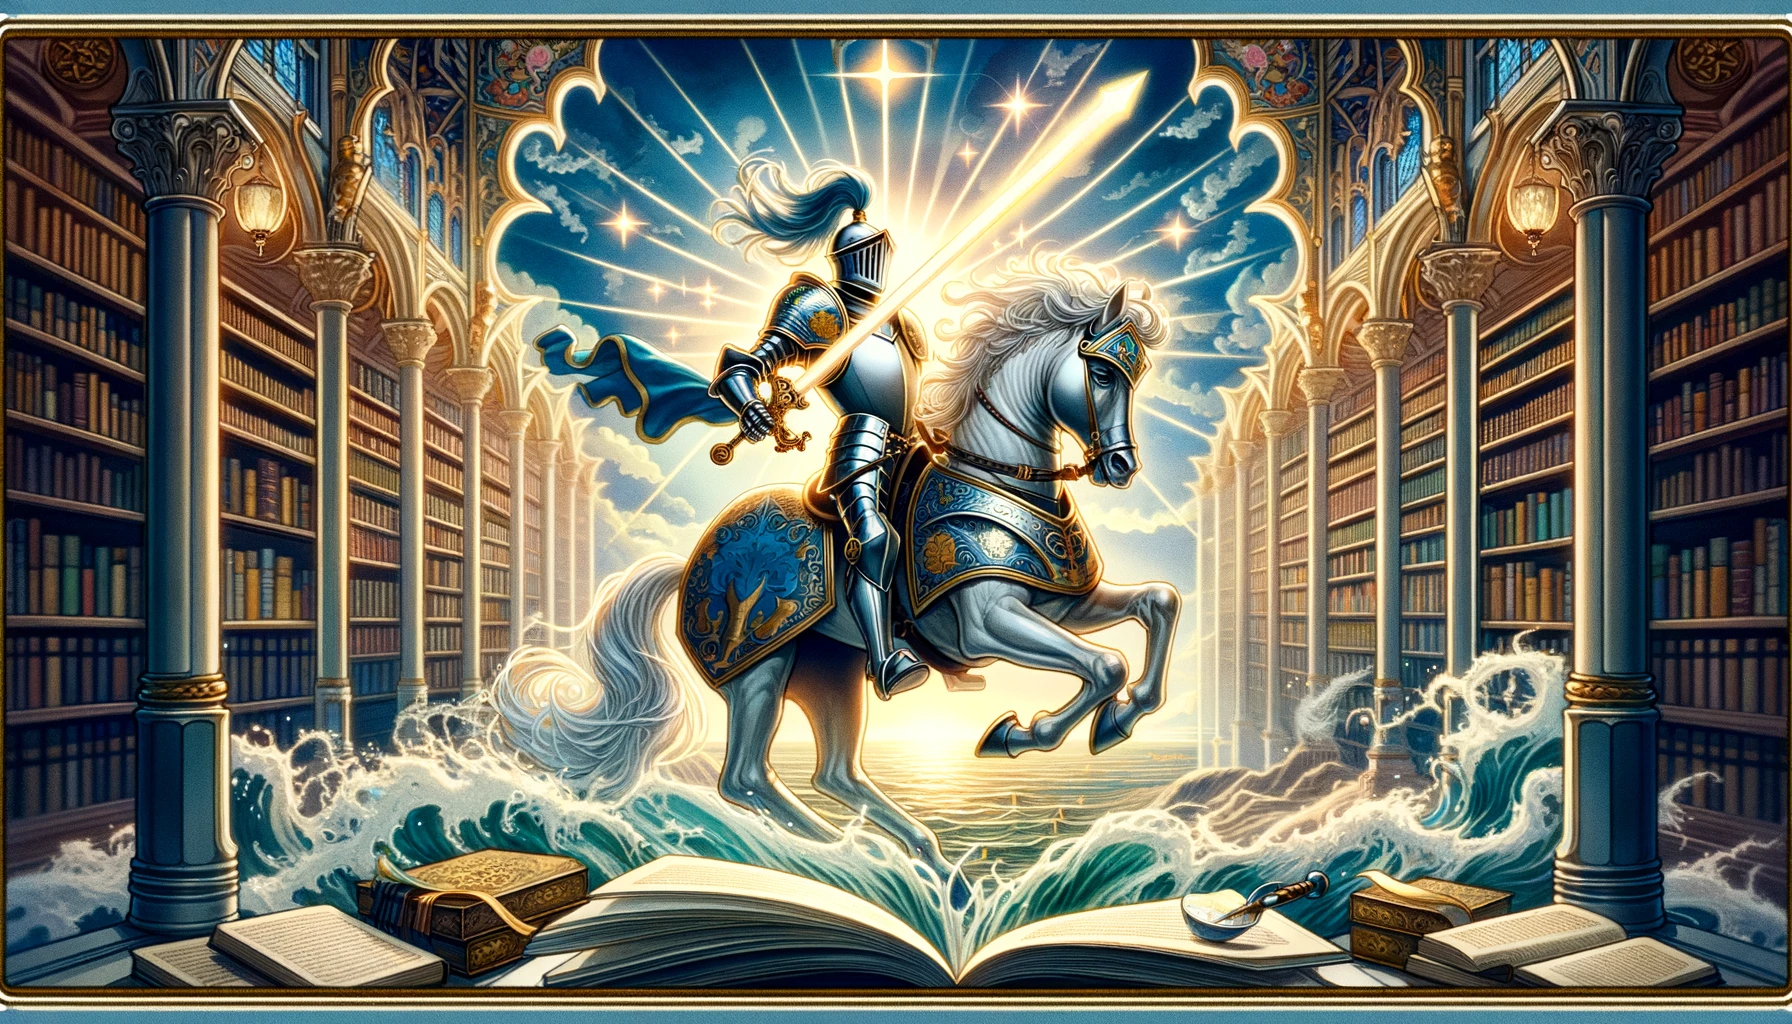 "An illustration depicting the Knight of Swords tarot card, showcasing the knight's ambition, direct action, and pursuit of intellectual challenges. The artwork embodies desires for intellectual achievement, clear communication, and the courage to confront challenges, enriching the article with a dynamic visual interpretation of the card's significance in expressing one's goals and aspirations."